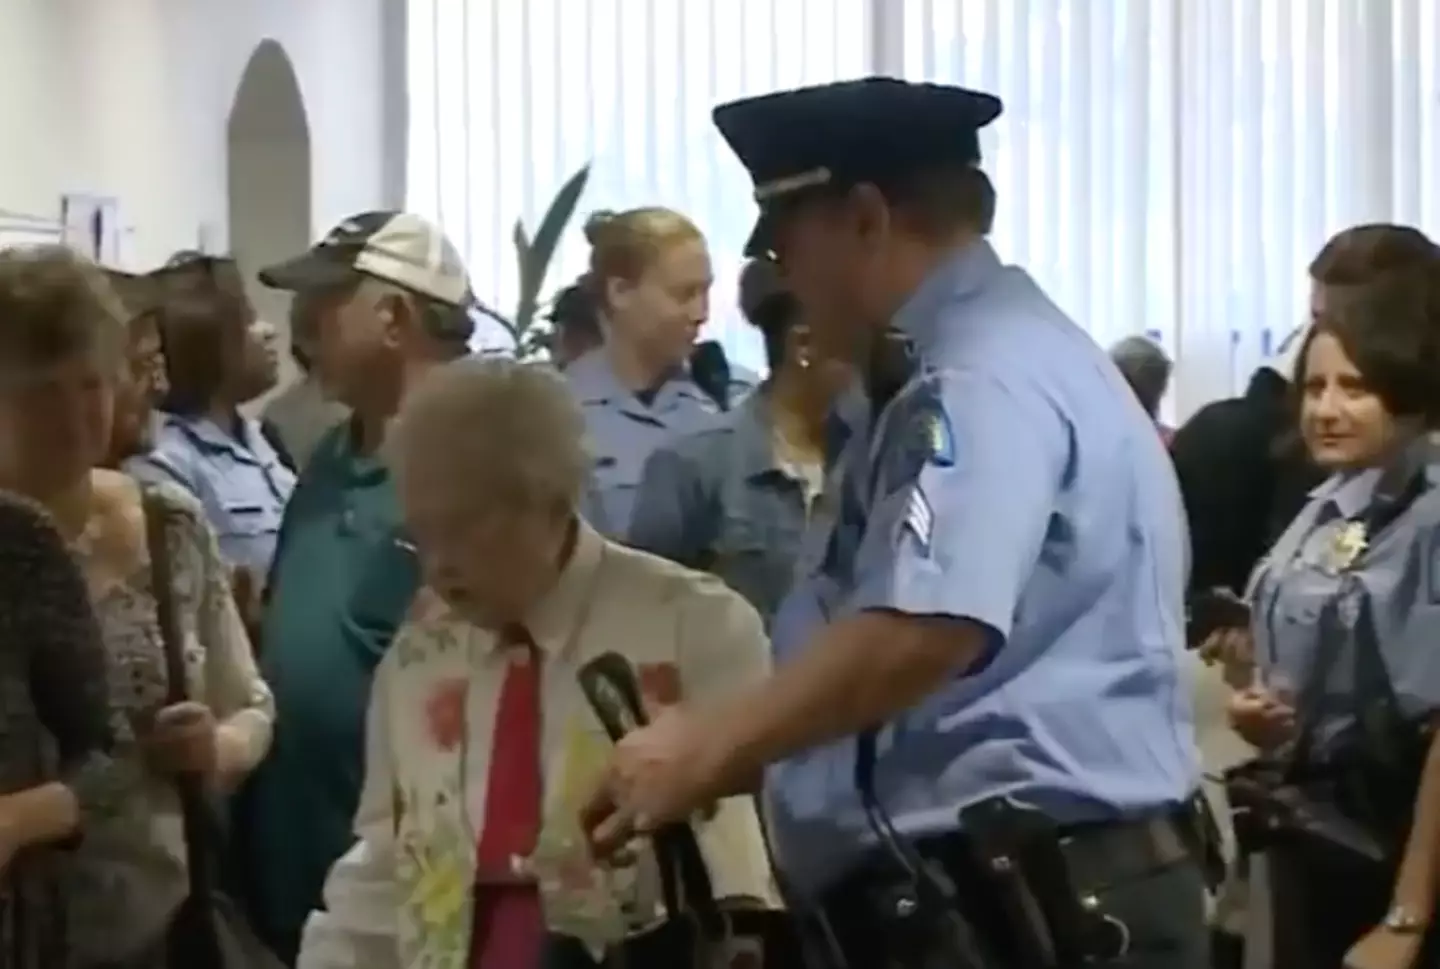 Edie was driven to a senior center in a police car.